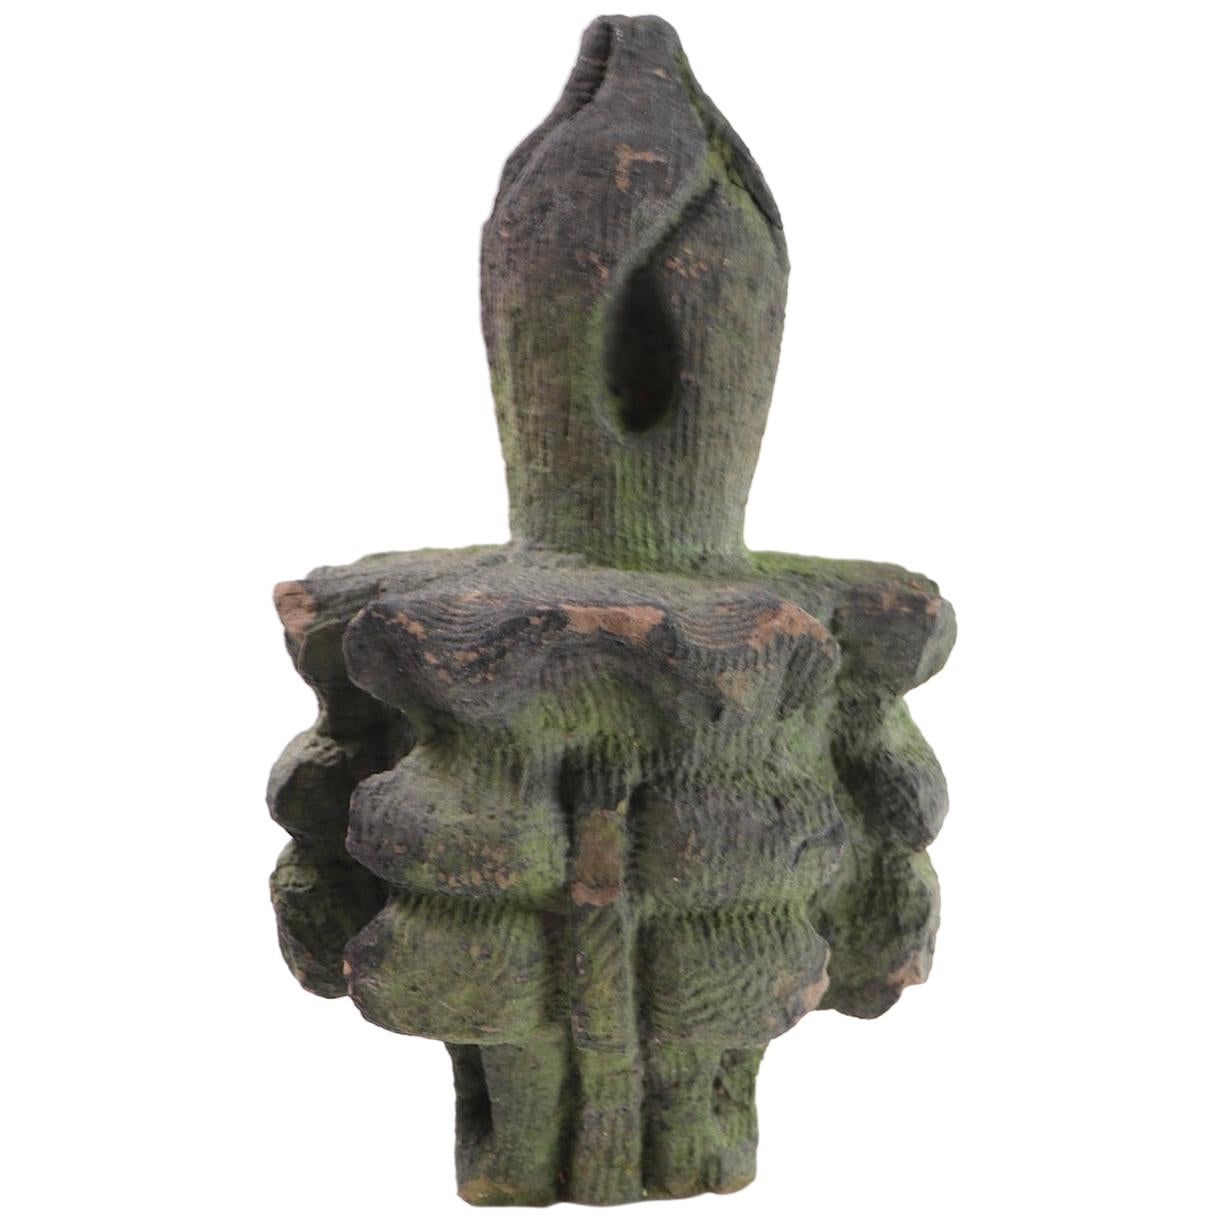 Brownstone Building  Finial Fragment in Moss Finish 